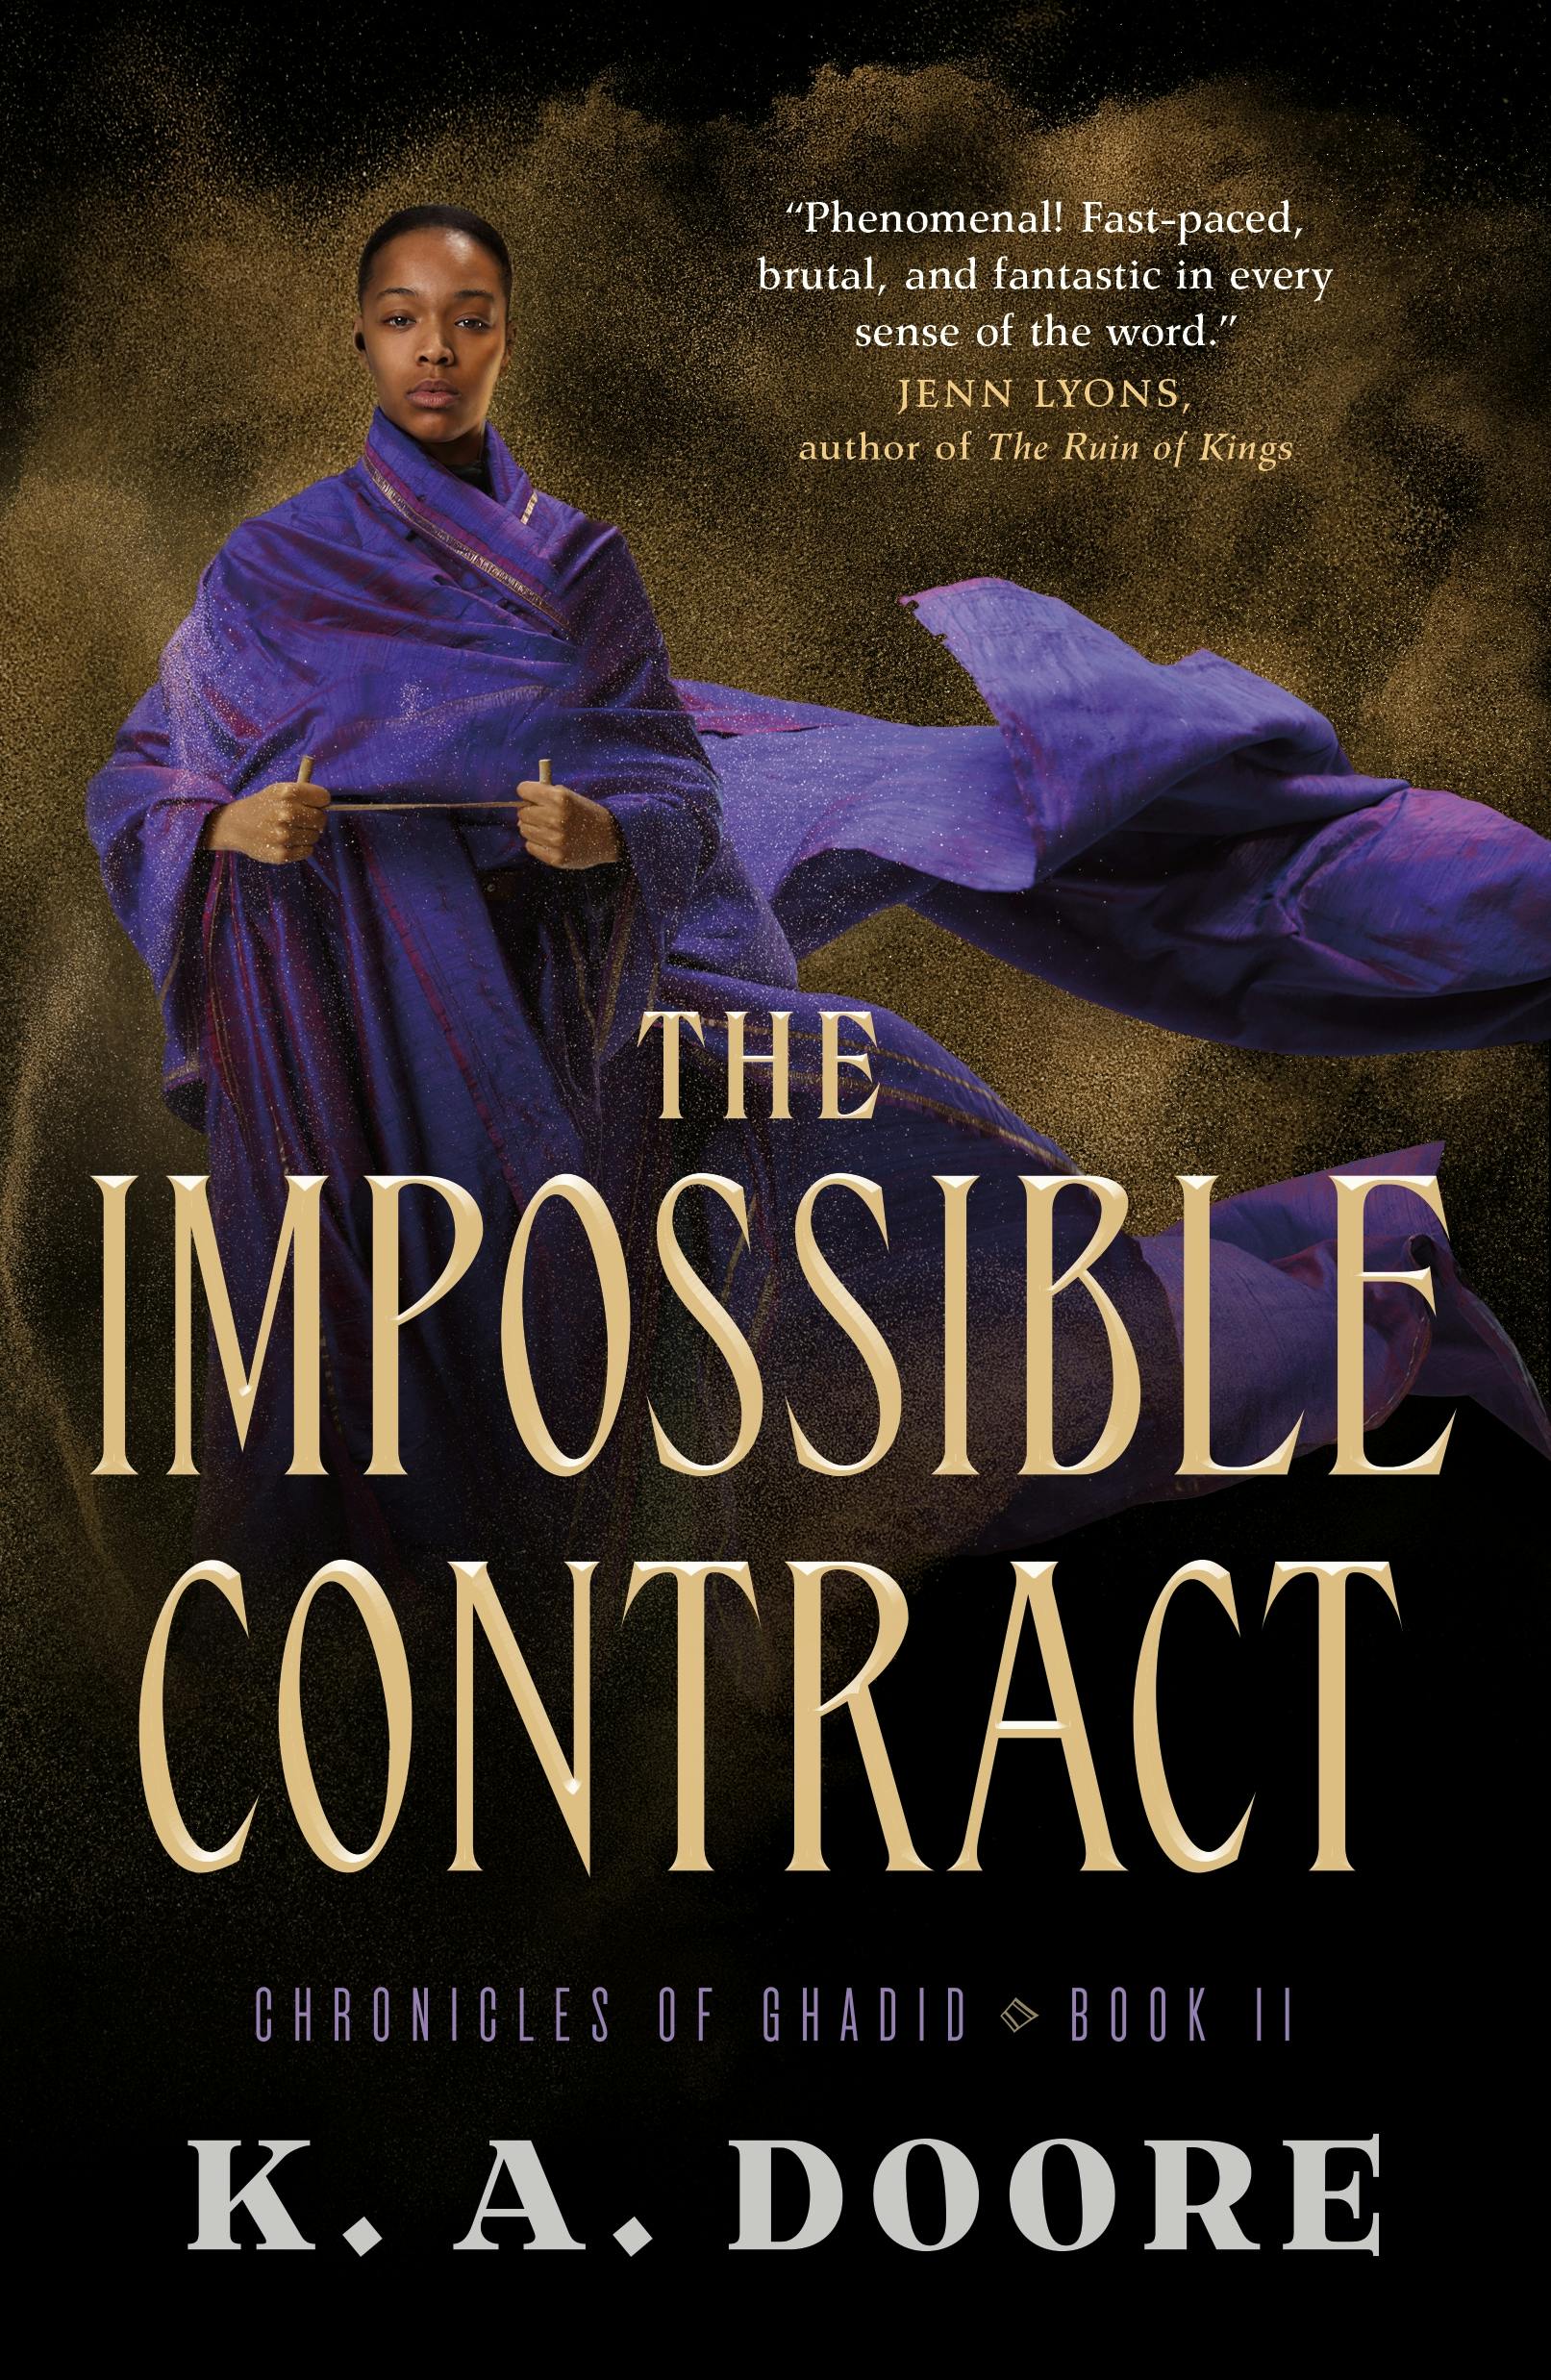 Image of The Impossible Contract